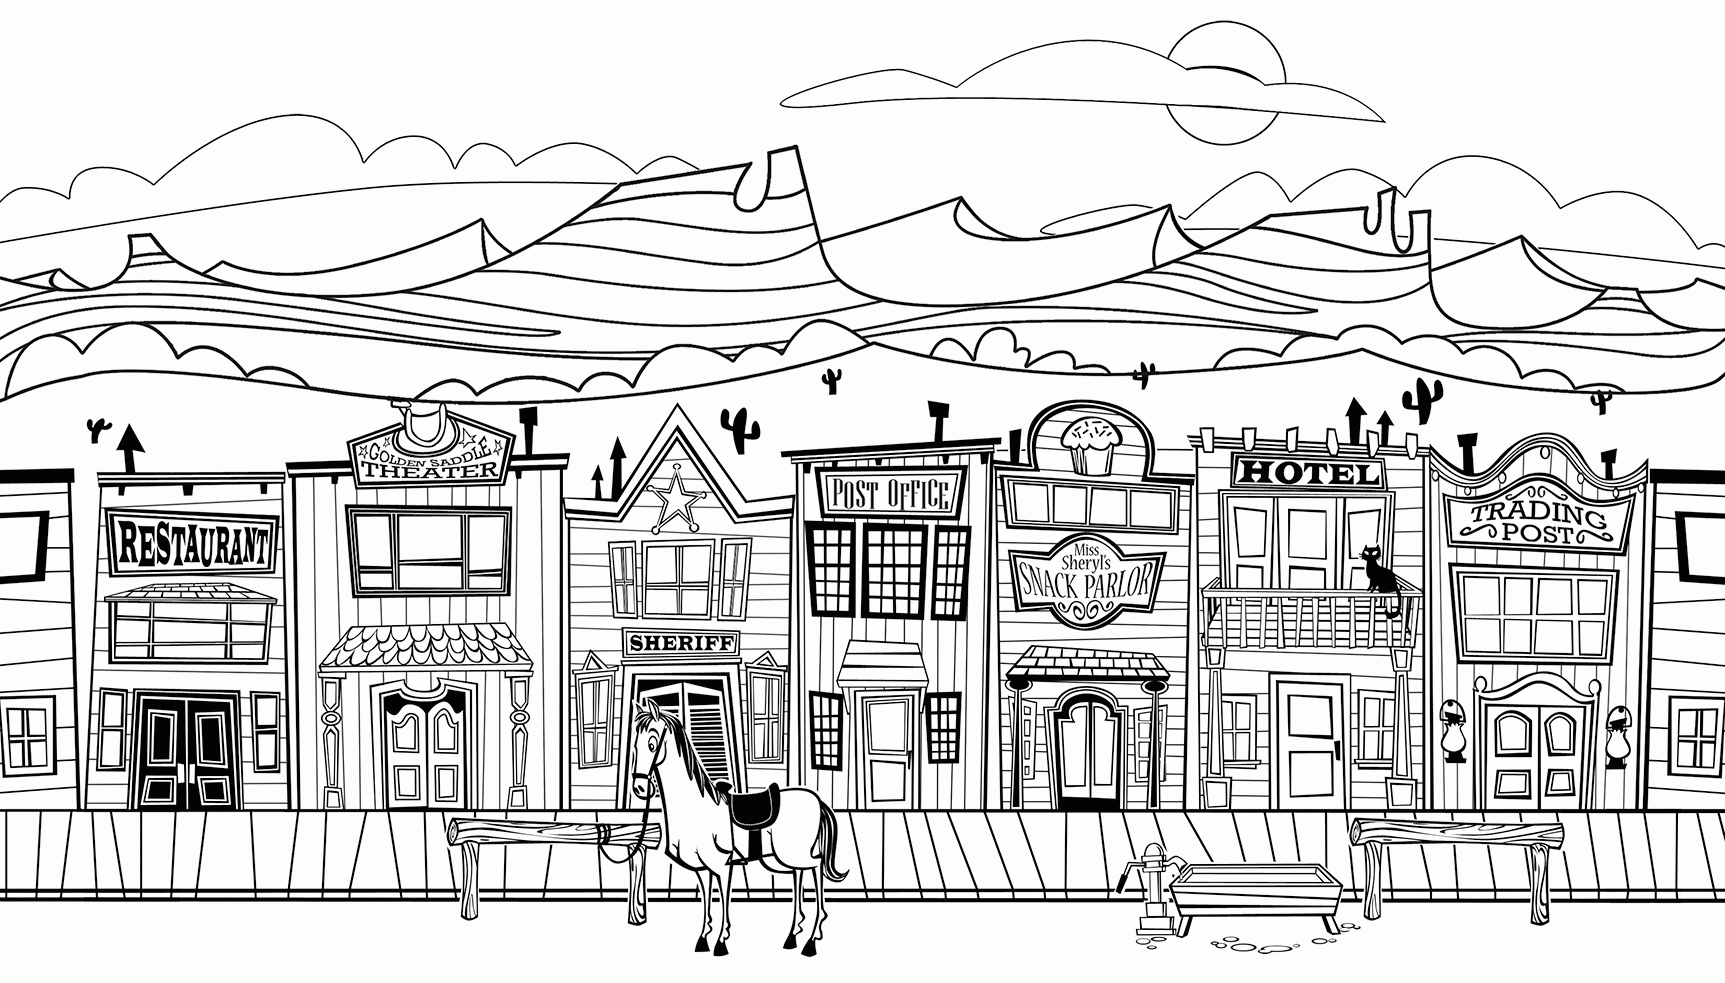 10 Pics of Western Landscape Coloring Page - Old Western Town ...